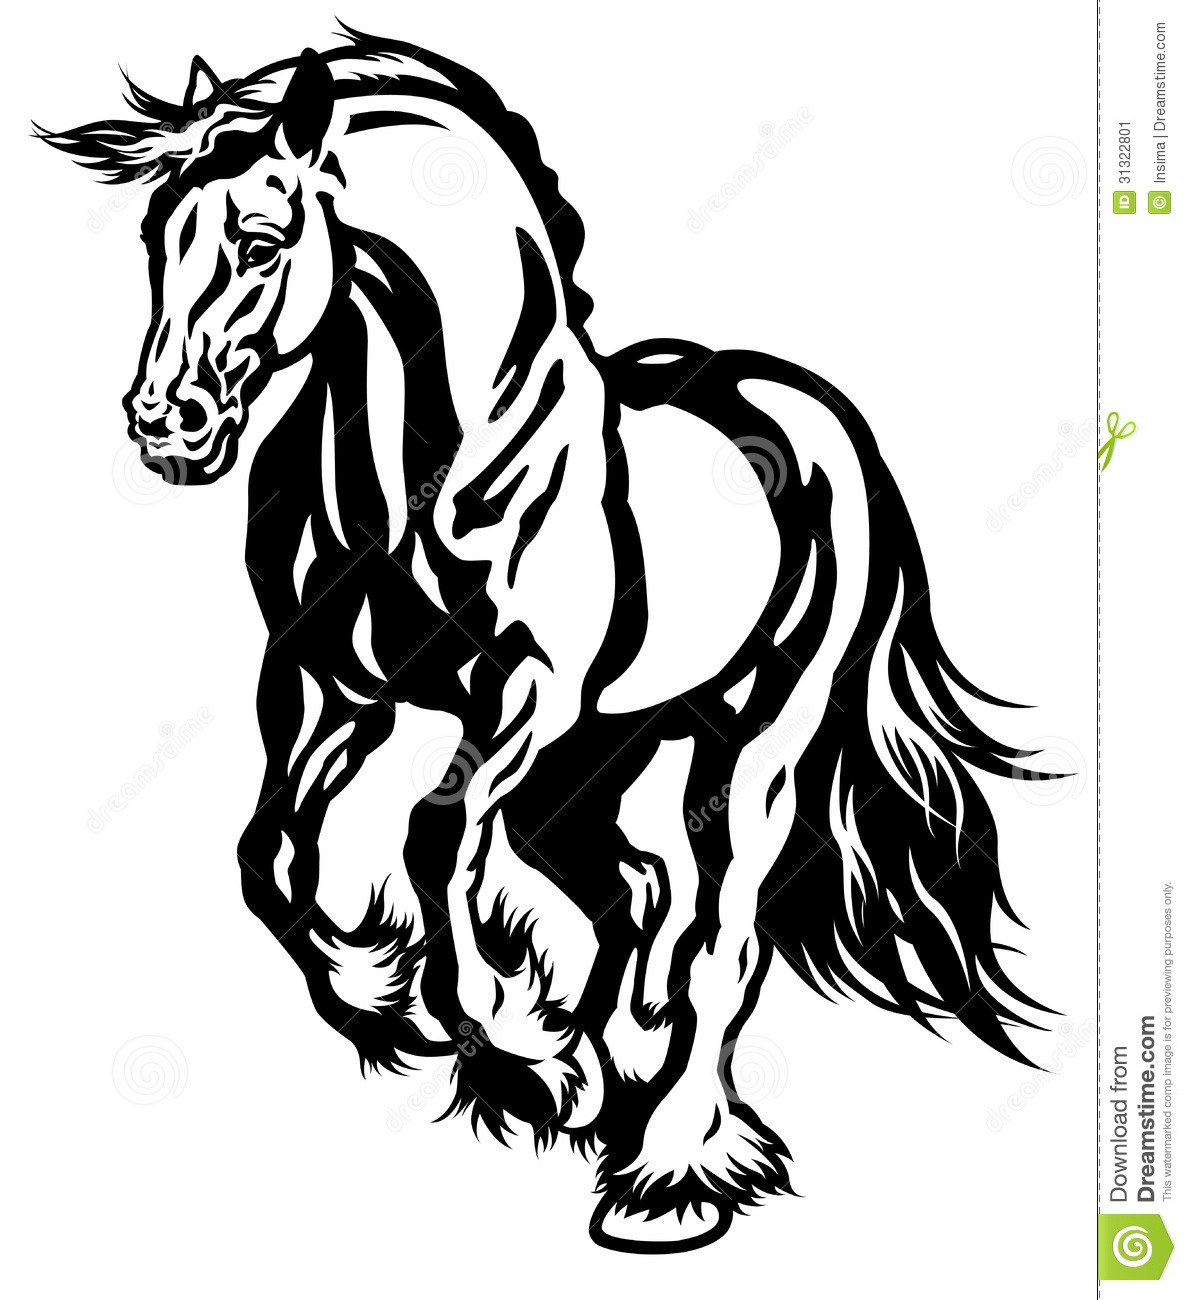 Running Draft Horse Black And White Picture